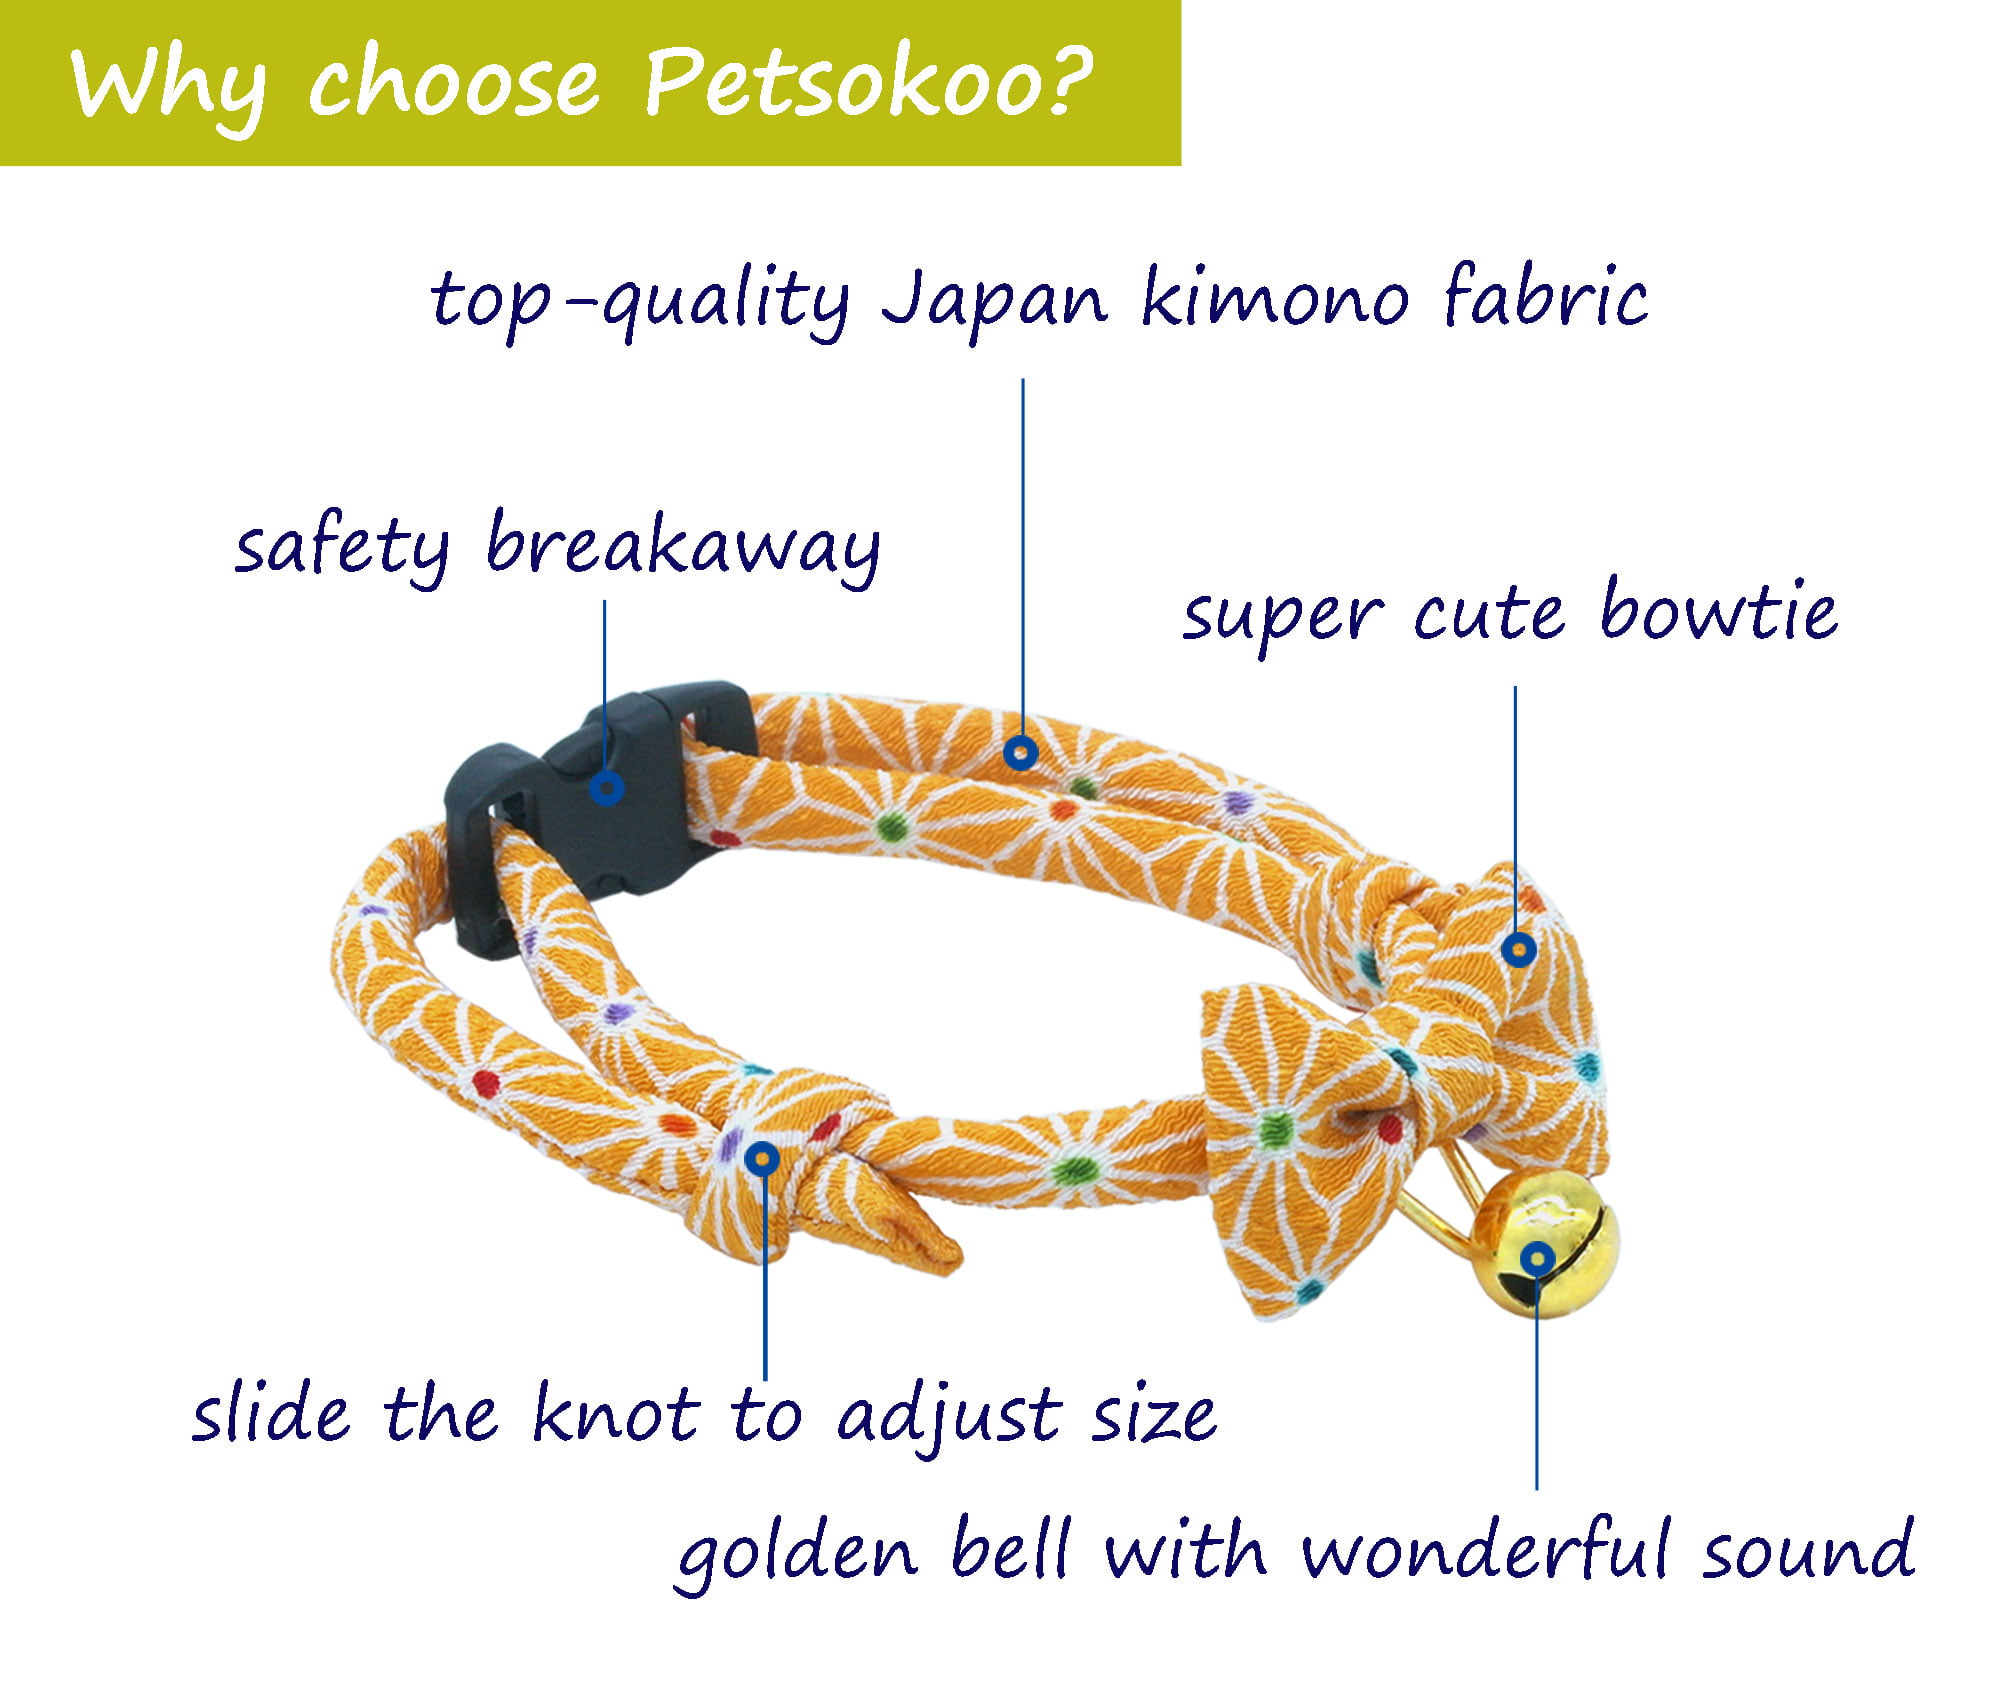 Tortoiseshell Pattern Safety Breakaway with Bow Cute Collars for Girl Boy Female Male Cats,Purple Comfortable Soft PetSoKoo Japan Chirimen Bowtie Cat Collar 